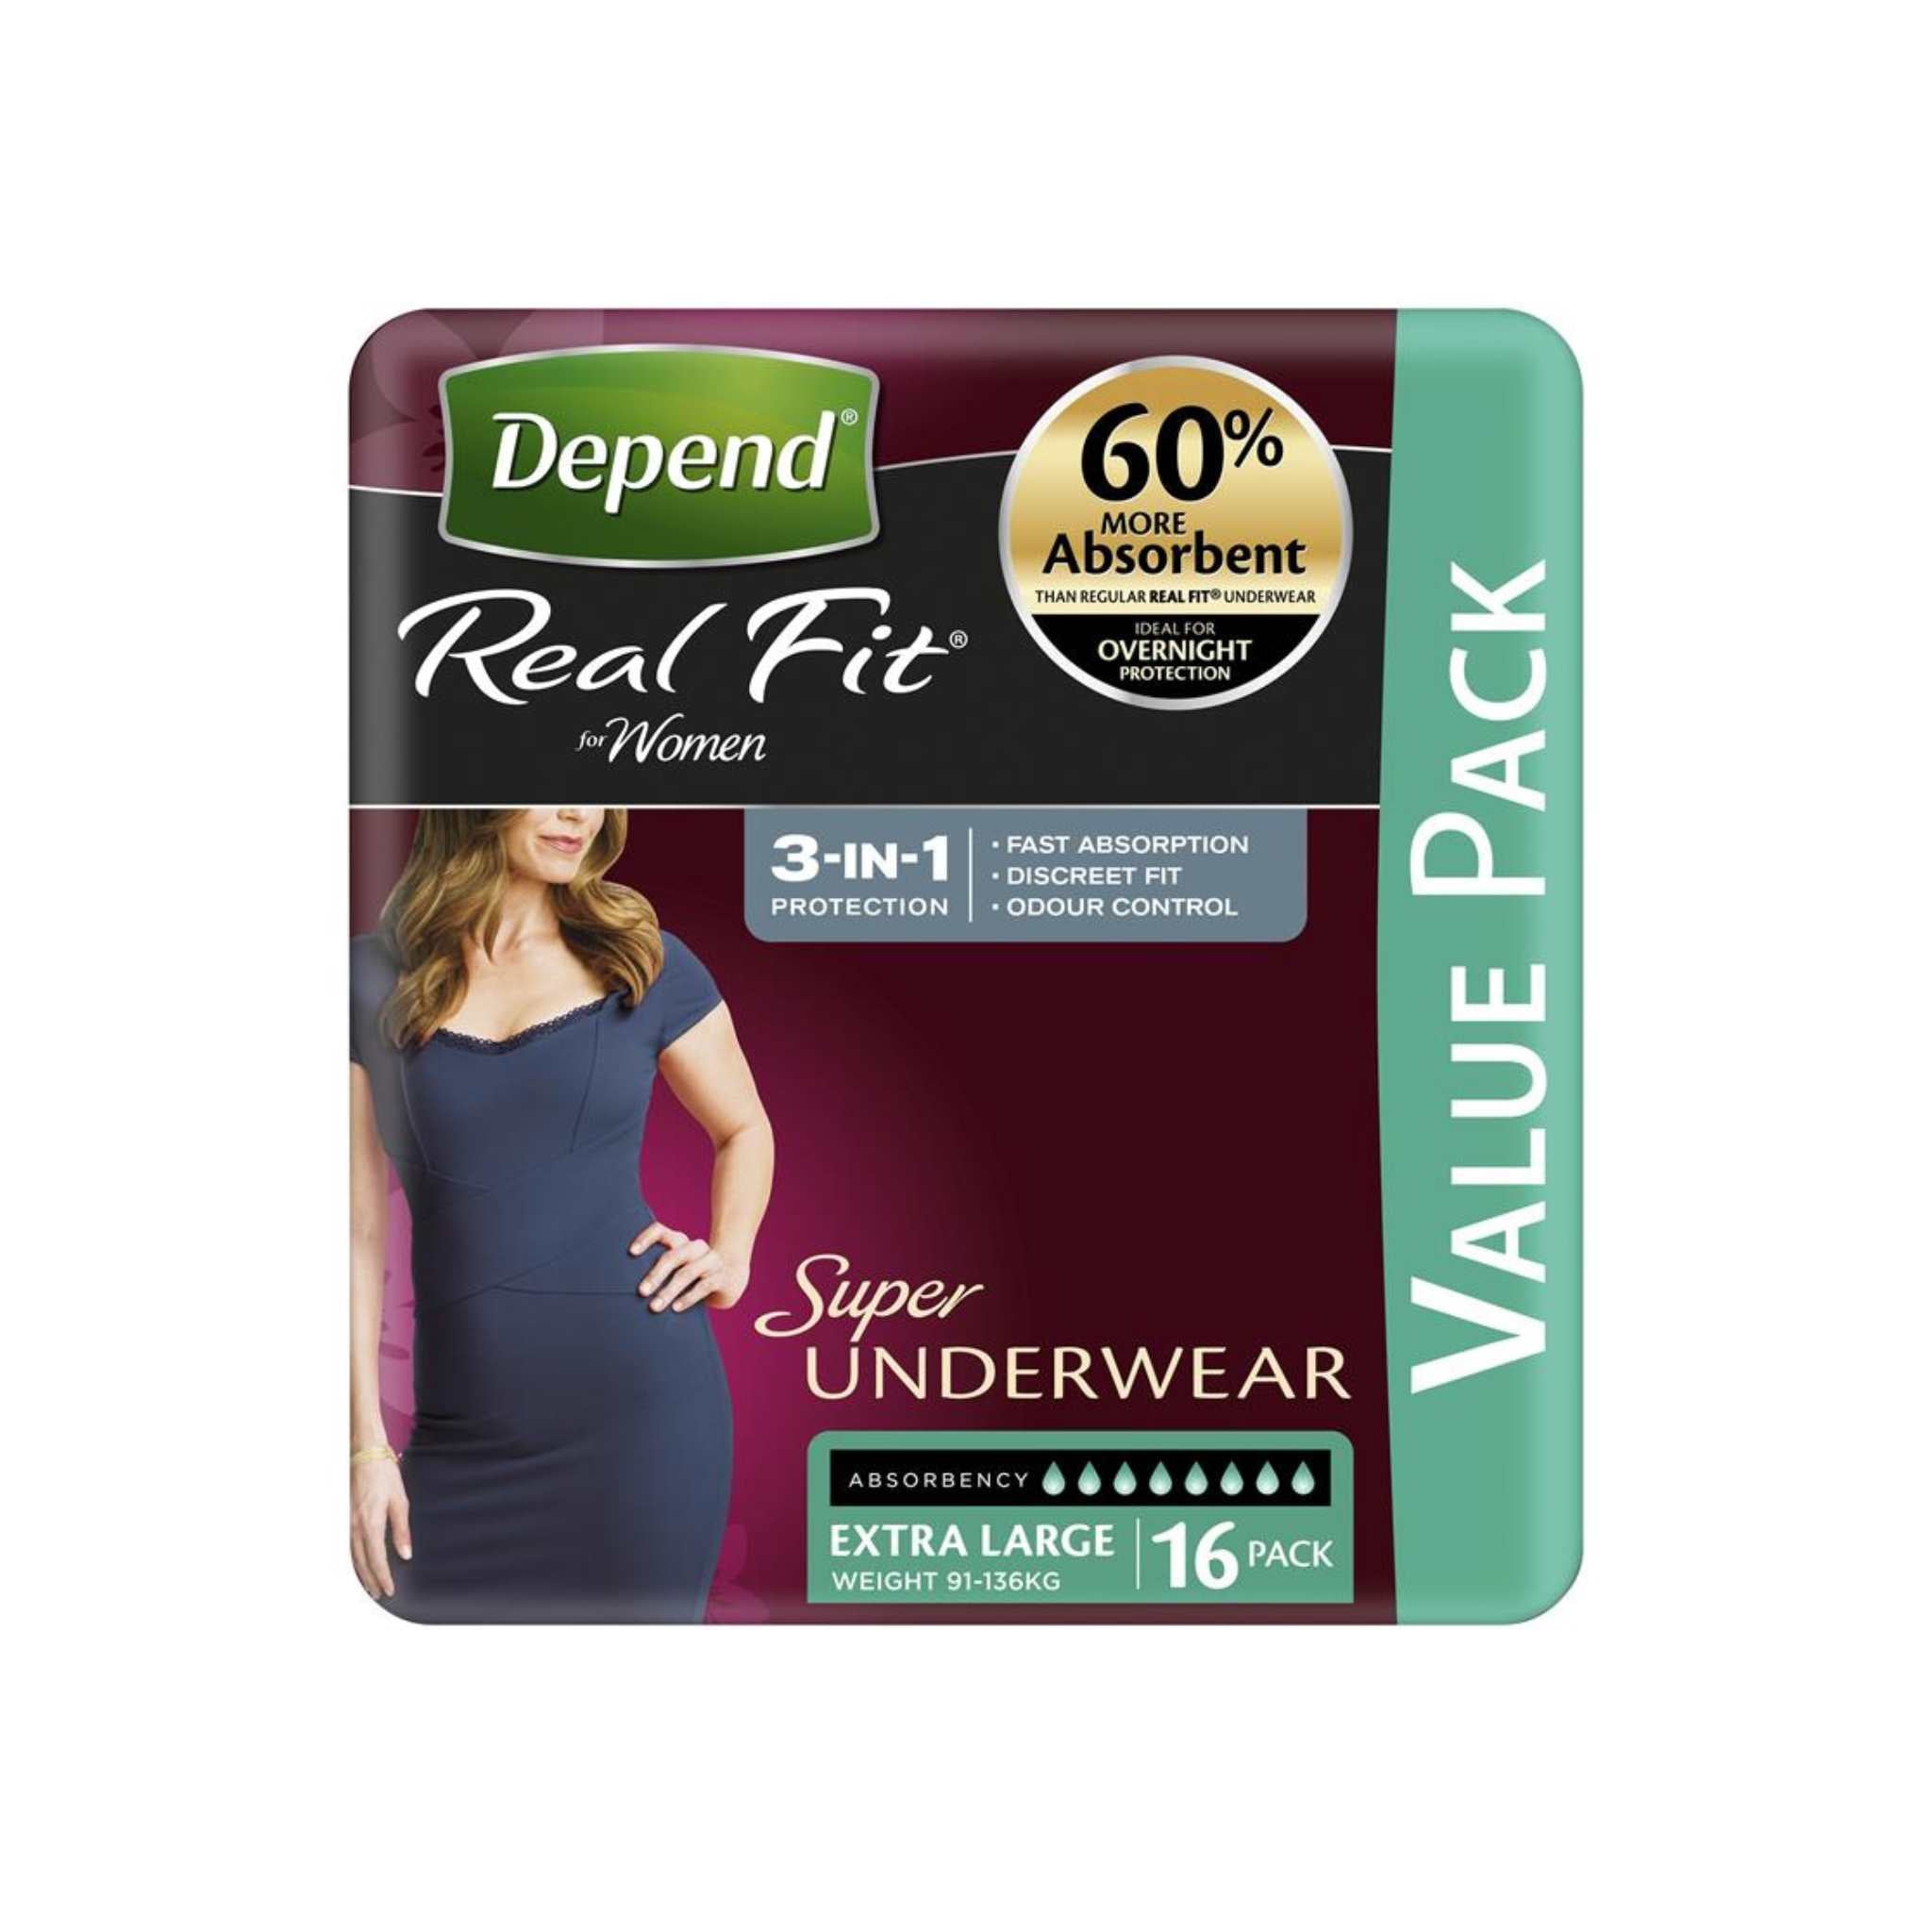 Good Price - Depend Real Fit Womens Underwear Large 8 Pack